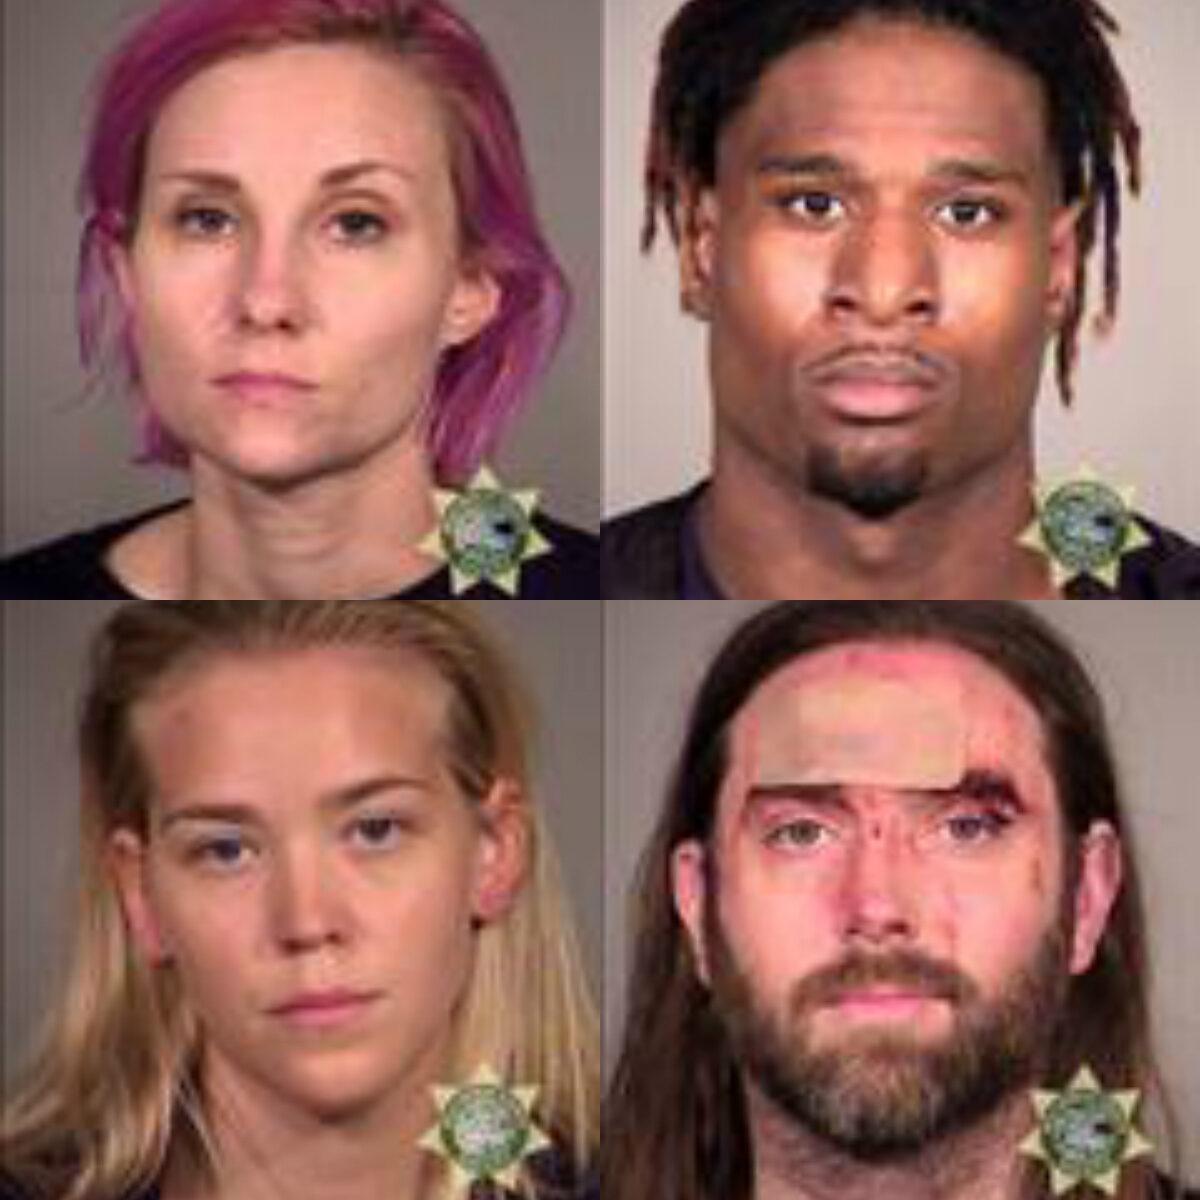 Hannah Baumann (top L), Maurice Monson (top R), Elizabeth Elder (bottom L), and Evan Burchfield (bottom R) were charged for participating in riots in Portland, Ore., on various dates this year. (Multnomah County Sheriff's Office)